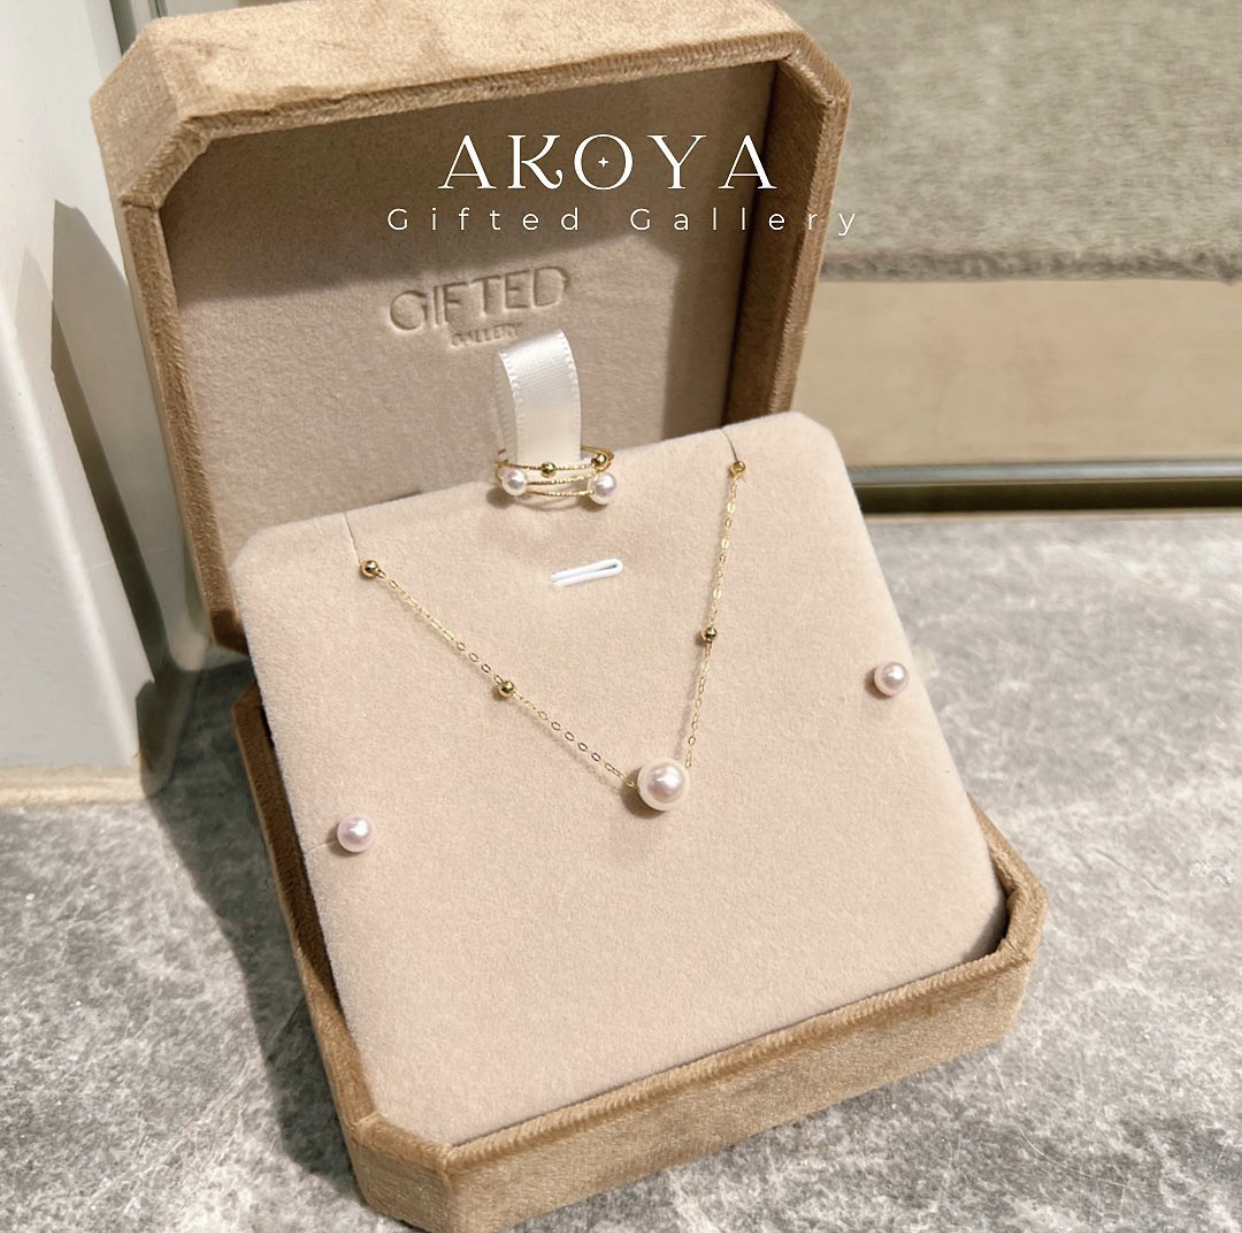 Akoya 18k by Gifted Gallery